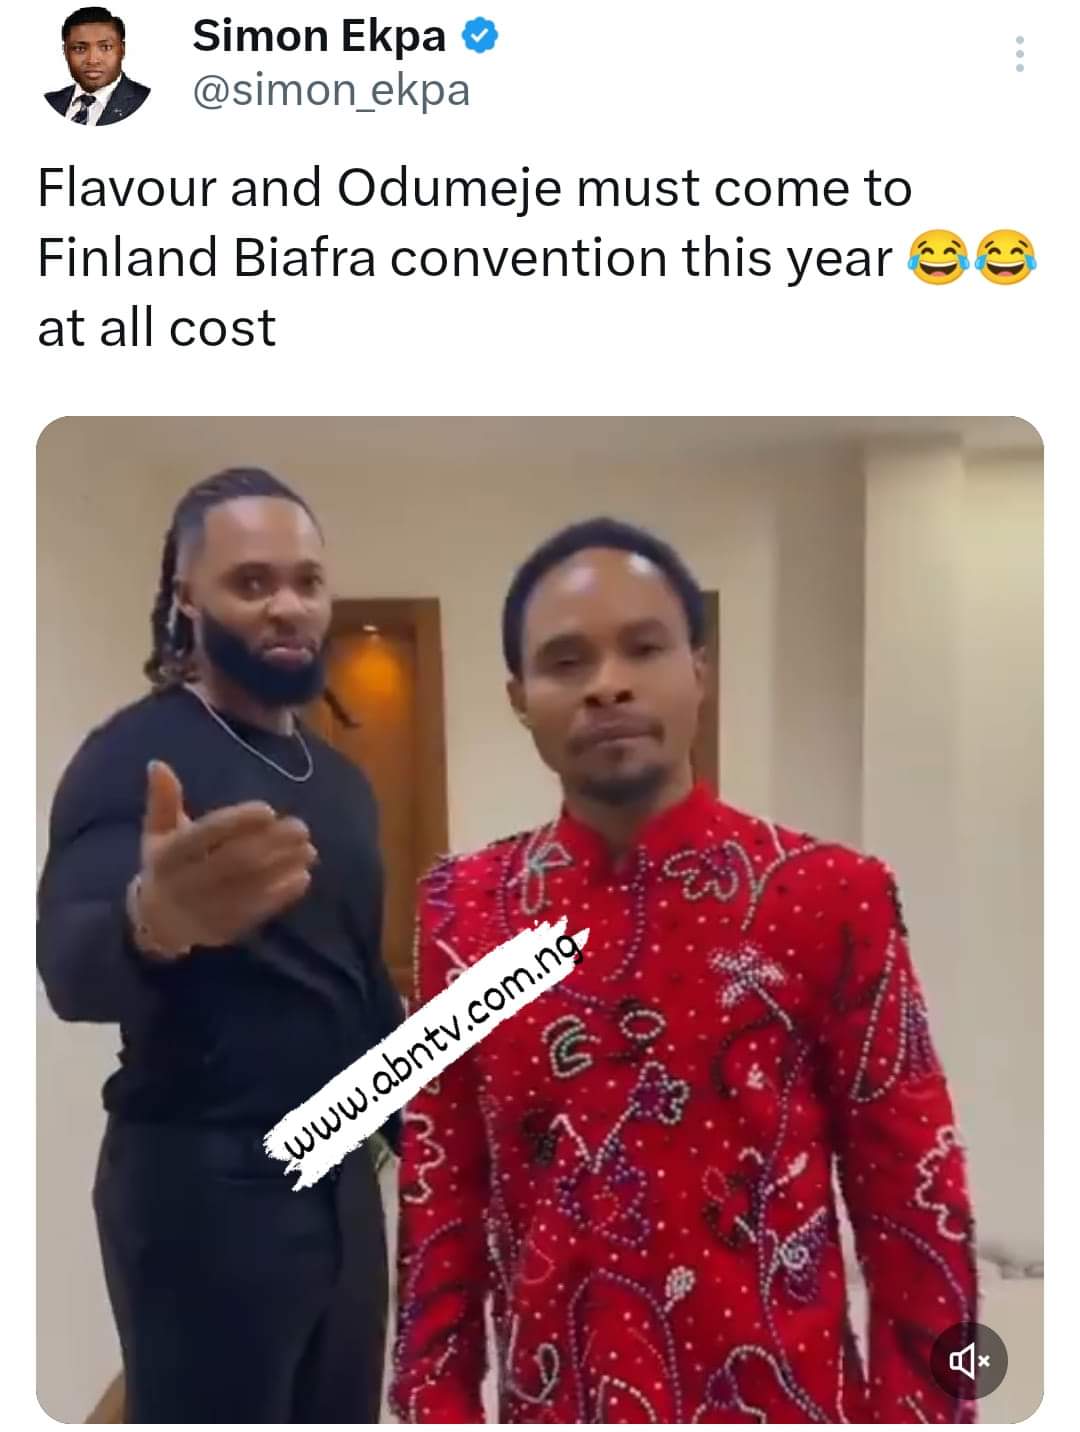 "Flavour, Odumeje Must Come To Finland Biafra Convention This Year At All Cost", Says Simon Ekpa